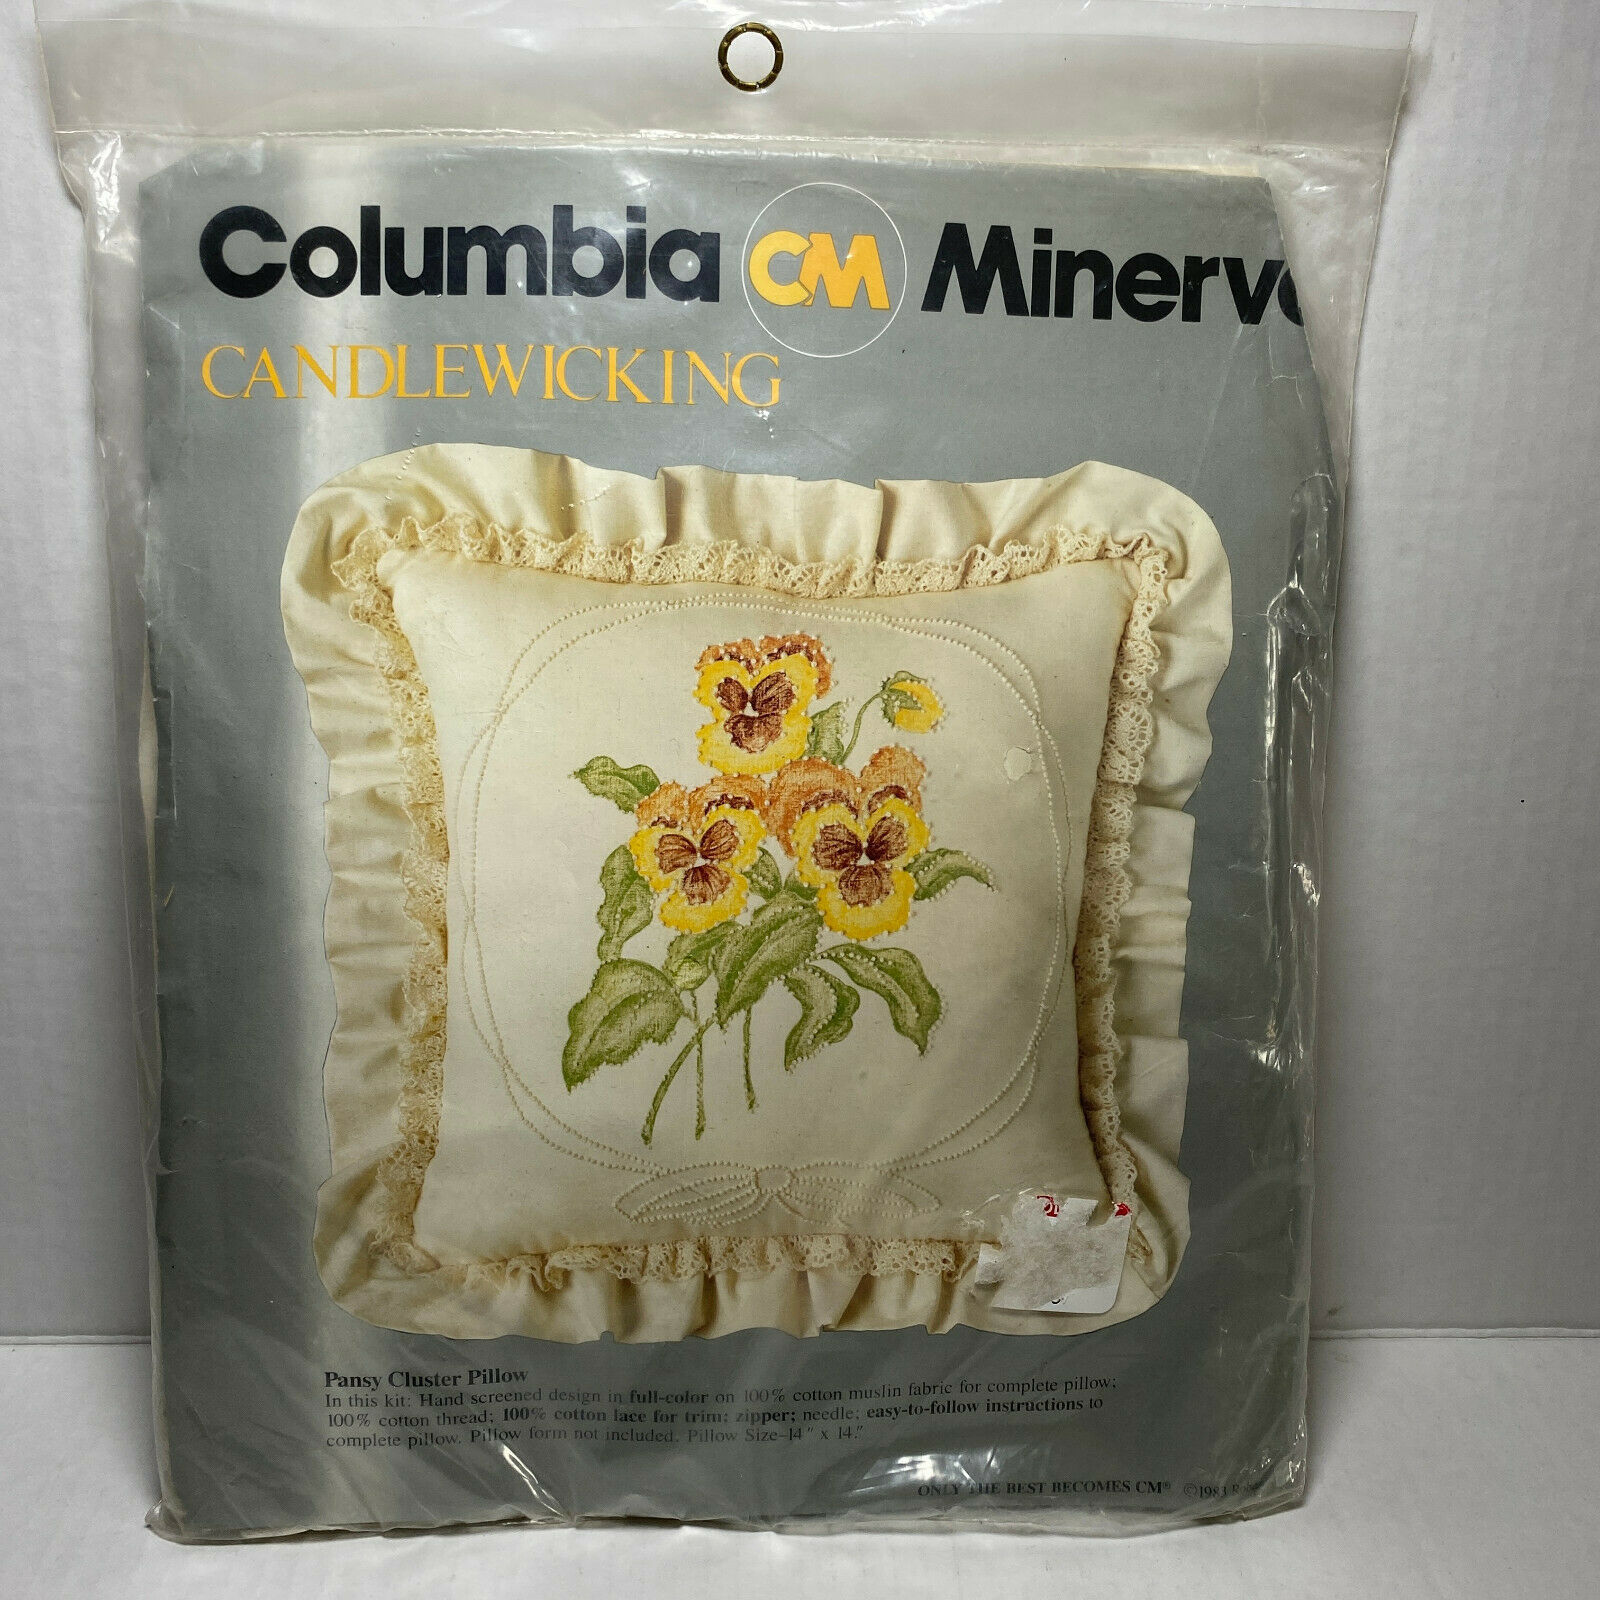 Vintage Columbia Minerva CM Candlewicking 7537 Pansy Cluster Pillow  - $14.84